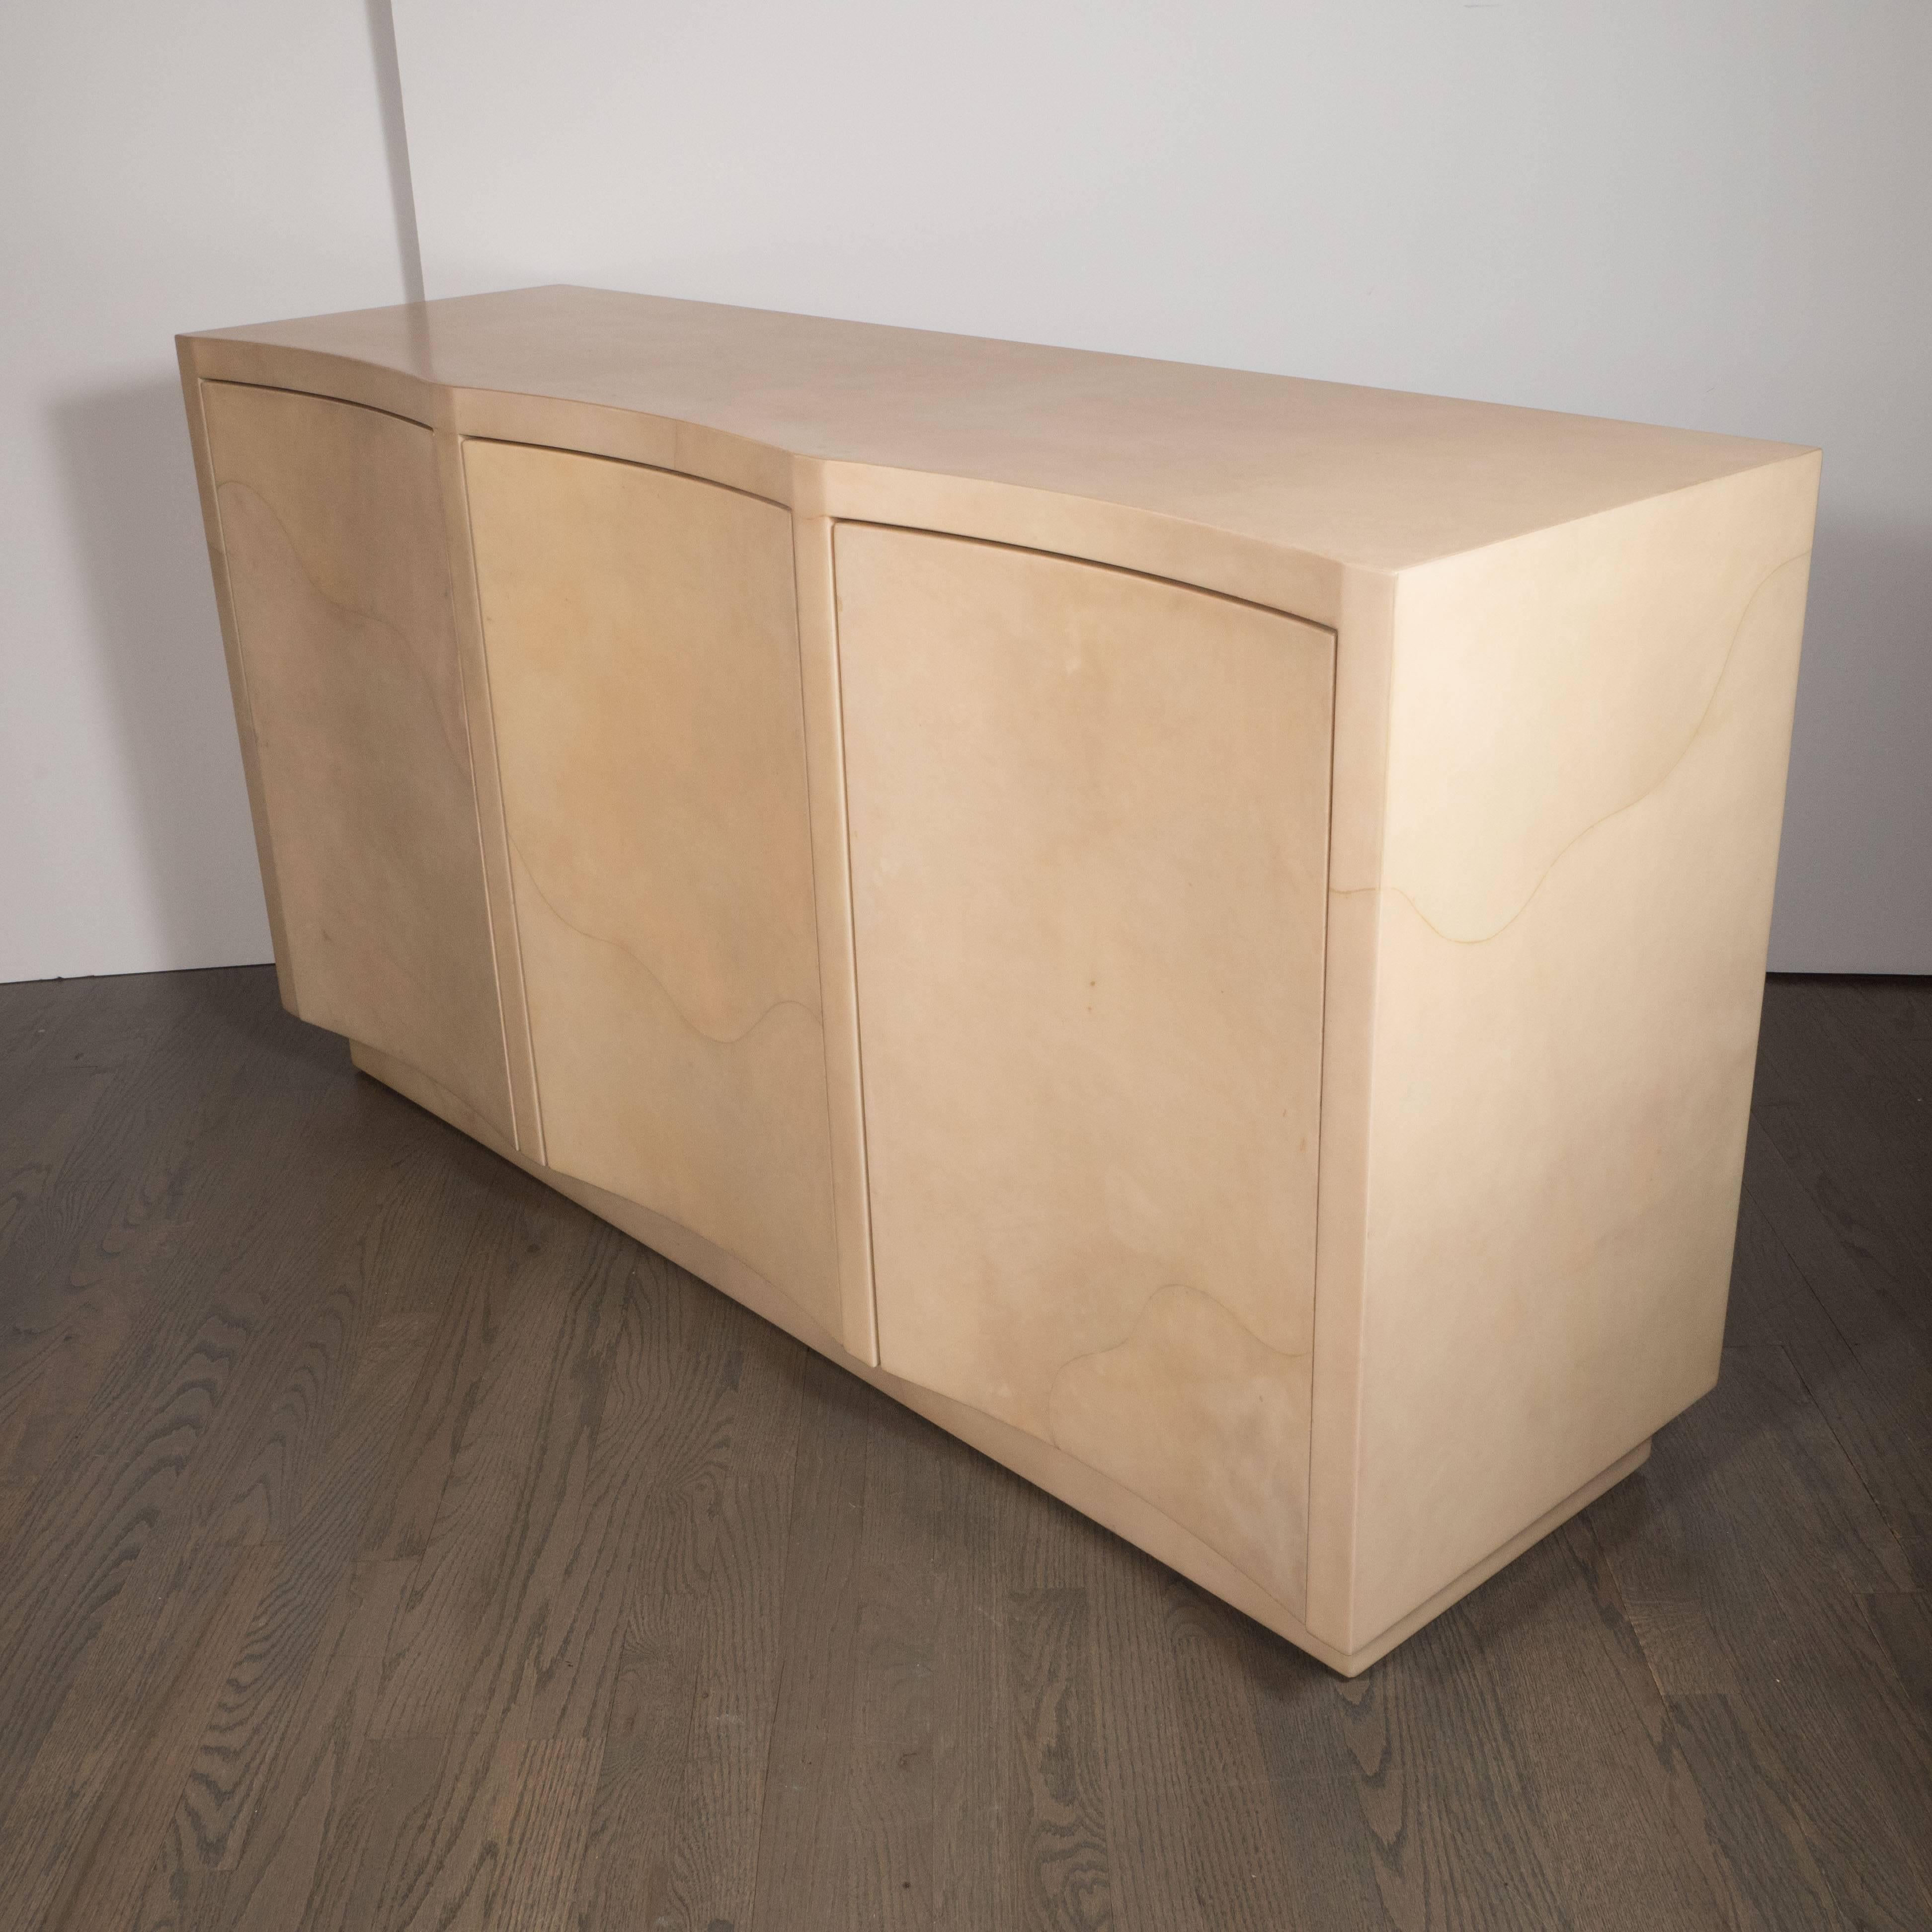 This stunning modernist cabinet illustrates the timeless appeal of excellent design. Composed of lacquered goat skin, the piece offers the color palate of bleached elm with variegated tones of tan and a texture suggestive of a quartz grain, with